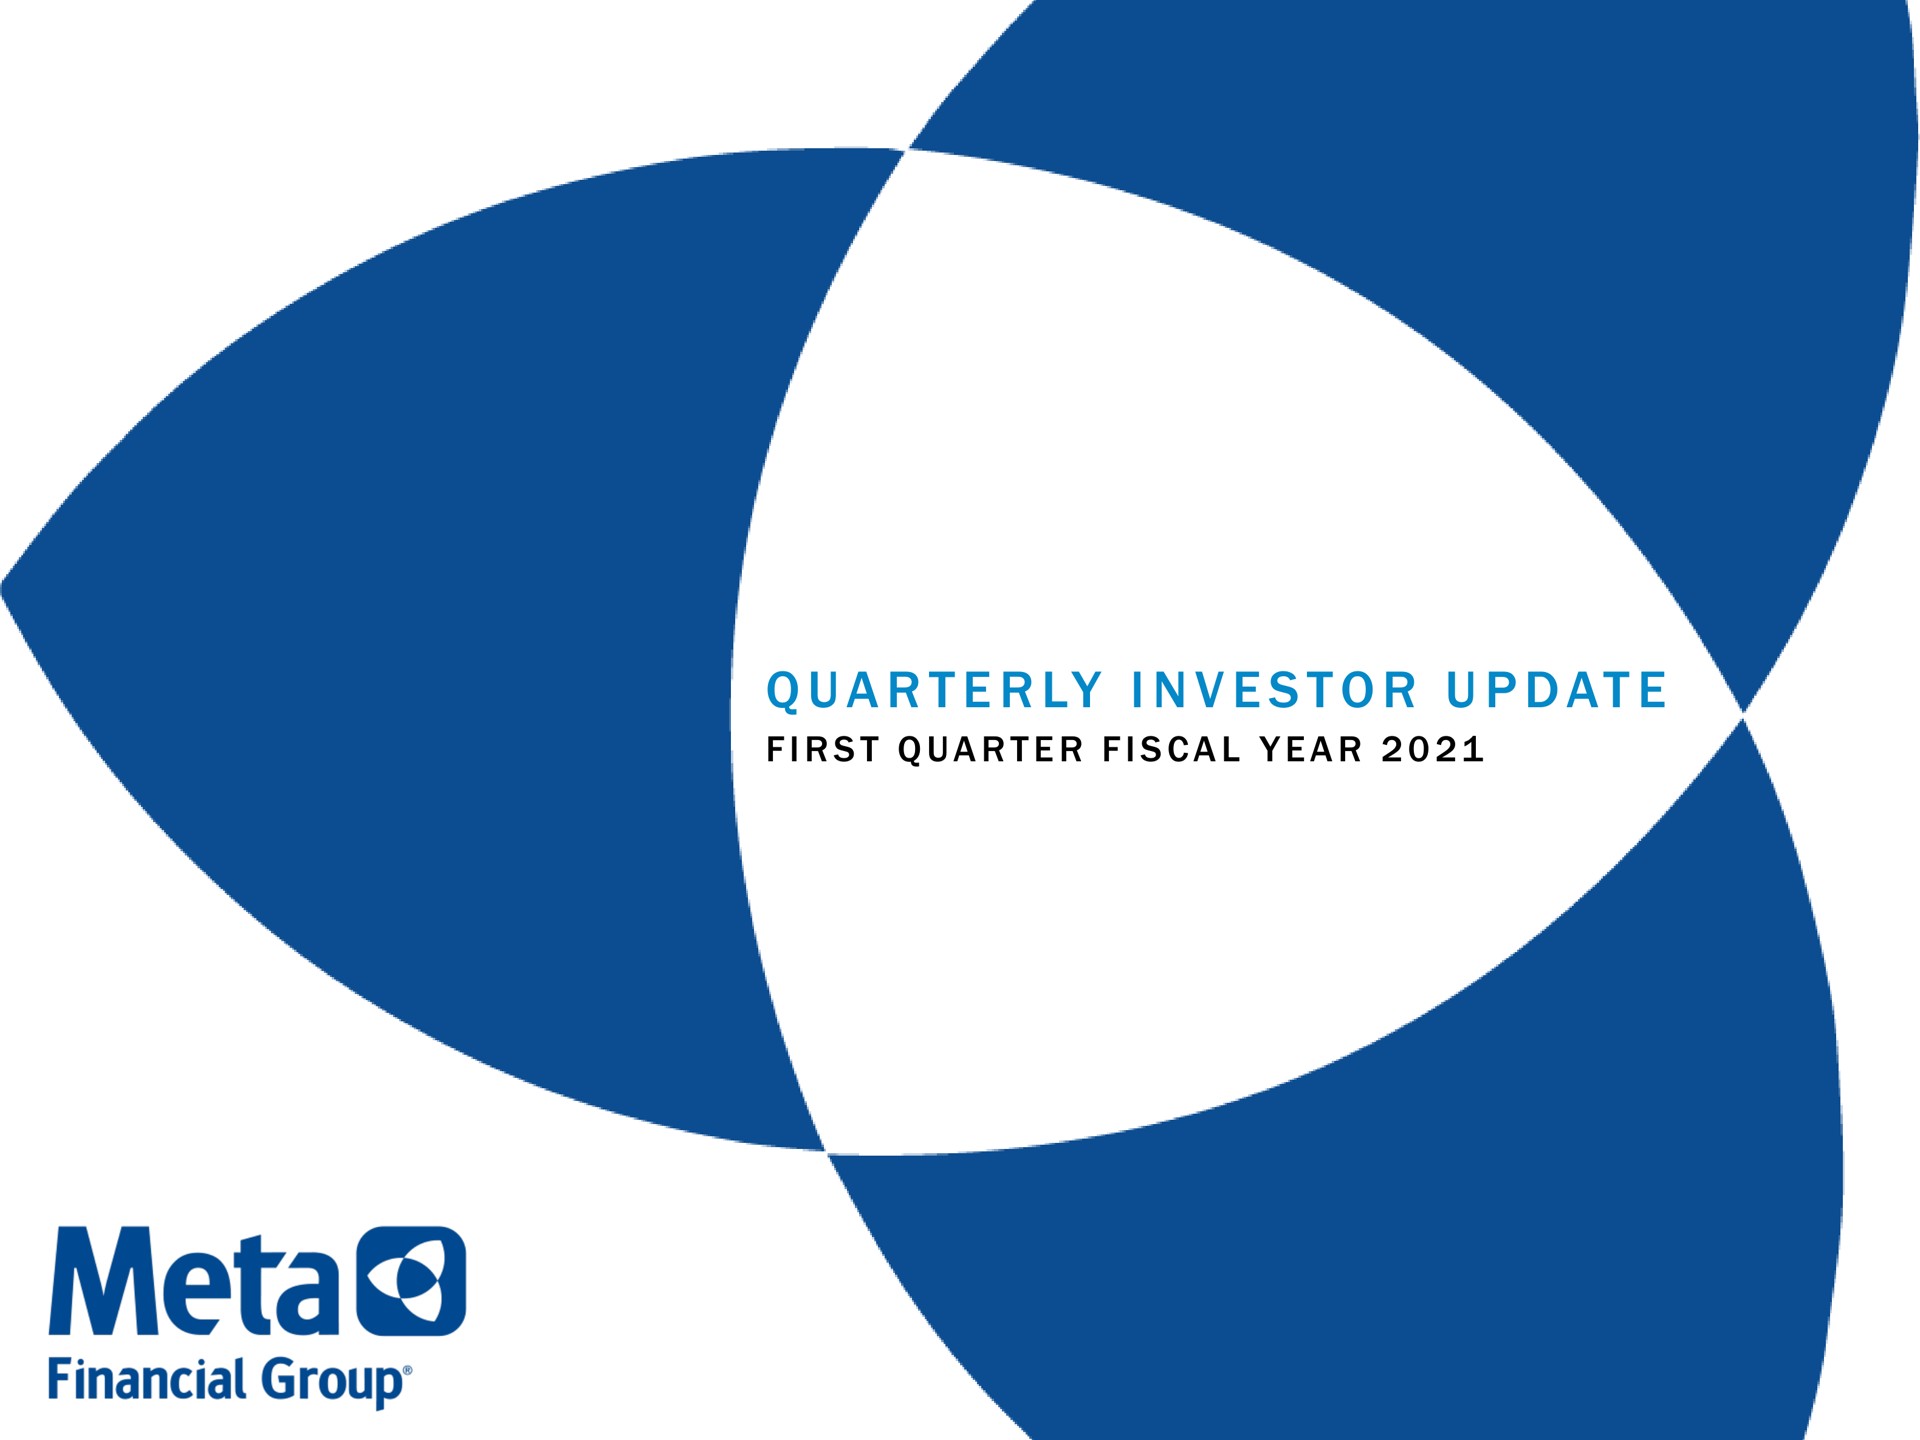 a i at i a i a a first quarter fiscal year quarterly investor update meta financial group | Pathward Financial